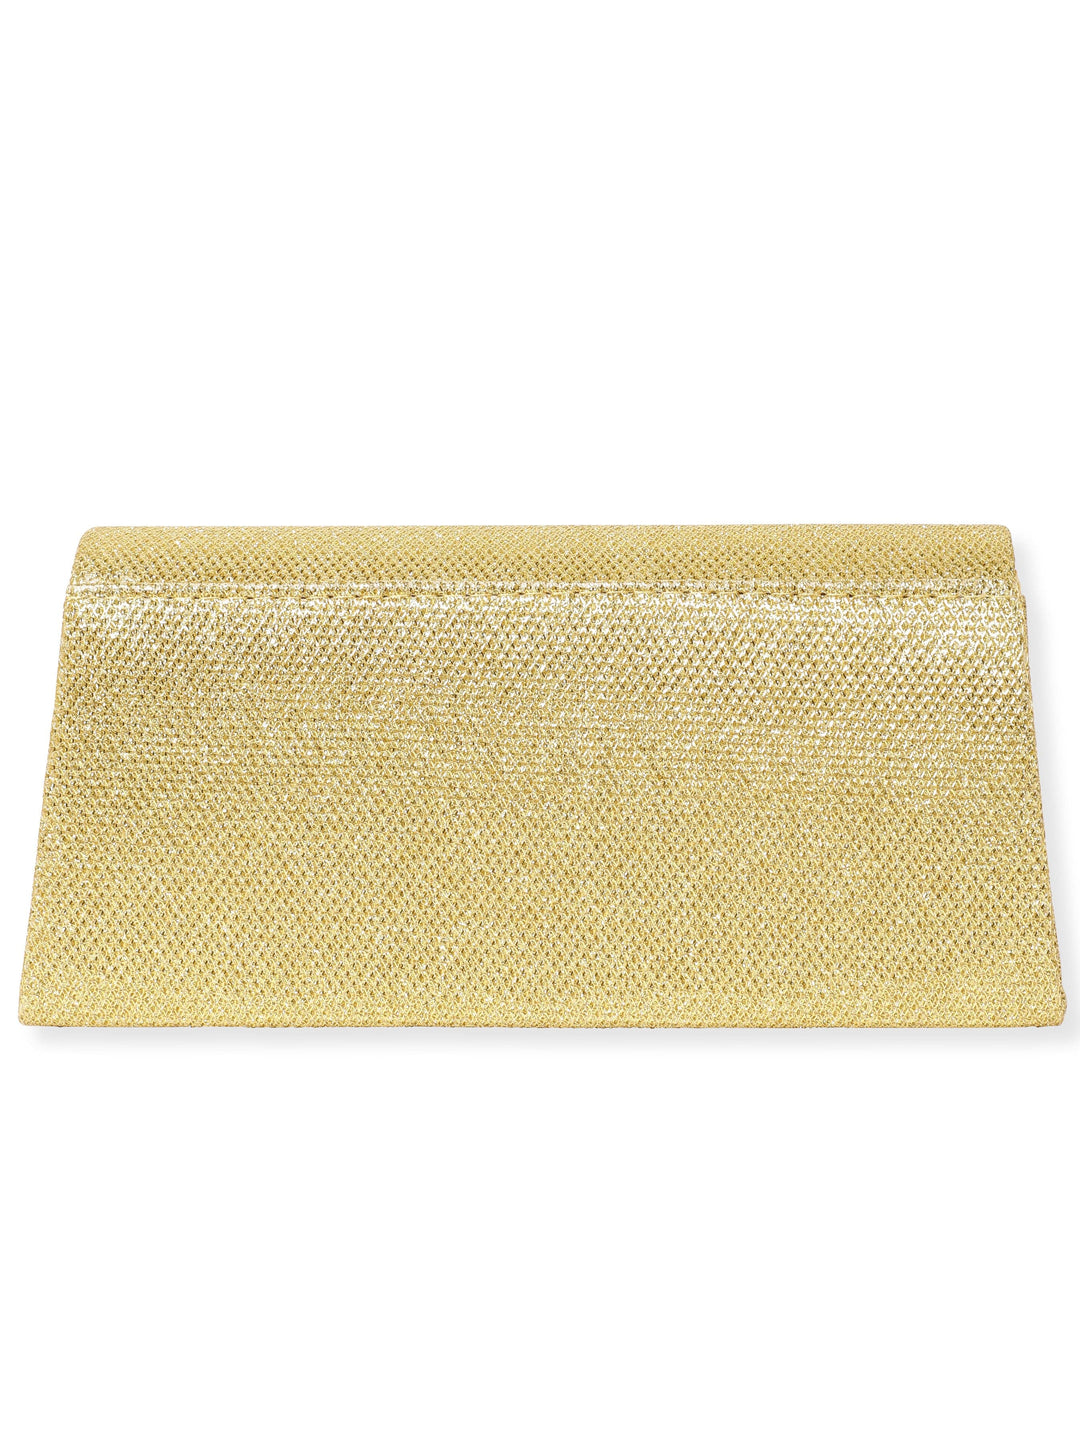 Rubans Timeless Glamour Handcrafted Beige Shimmery Clutch Bag Handbag, Wallet Accessories & Clutches